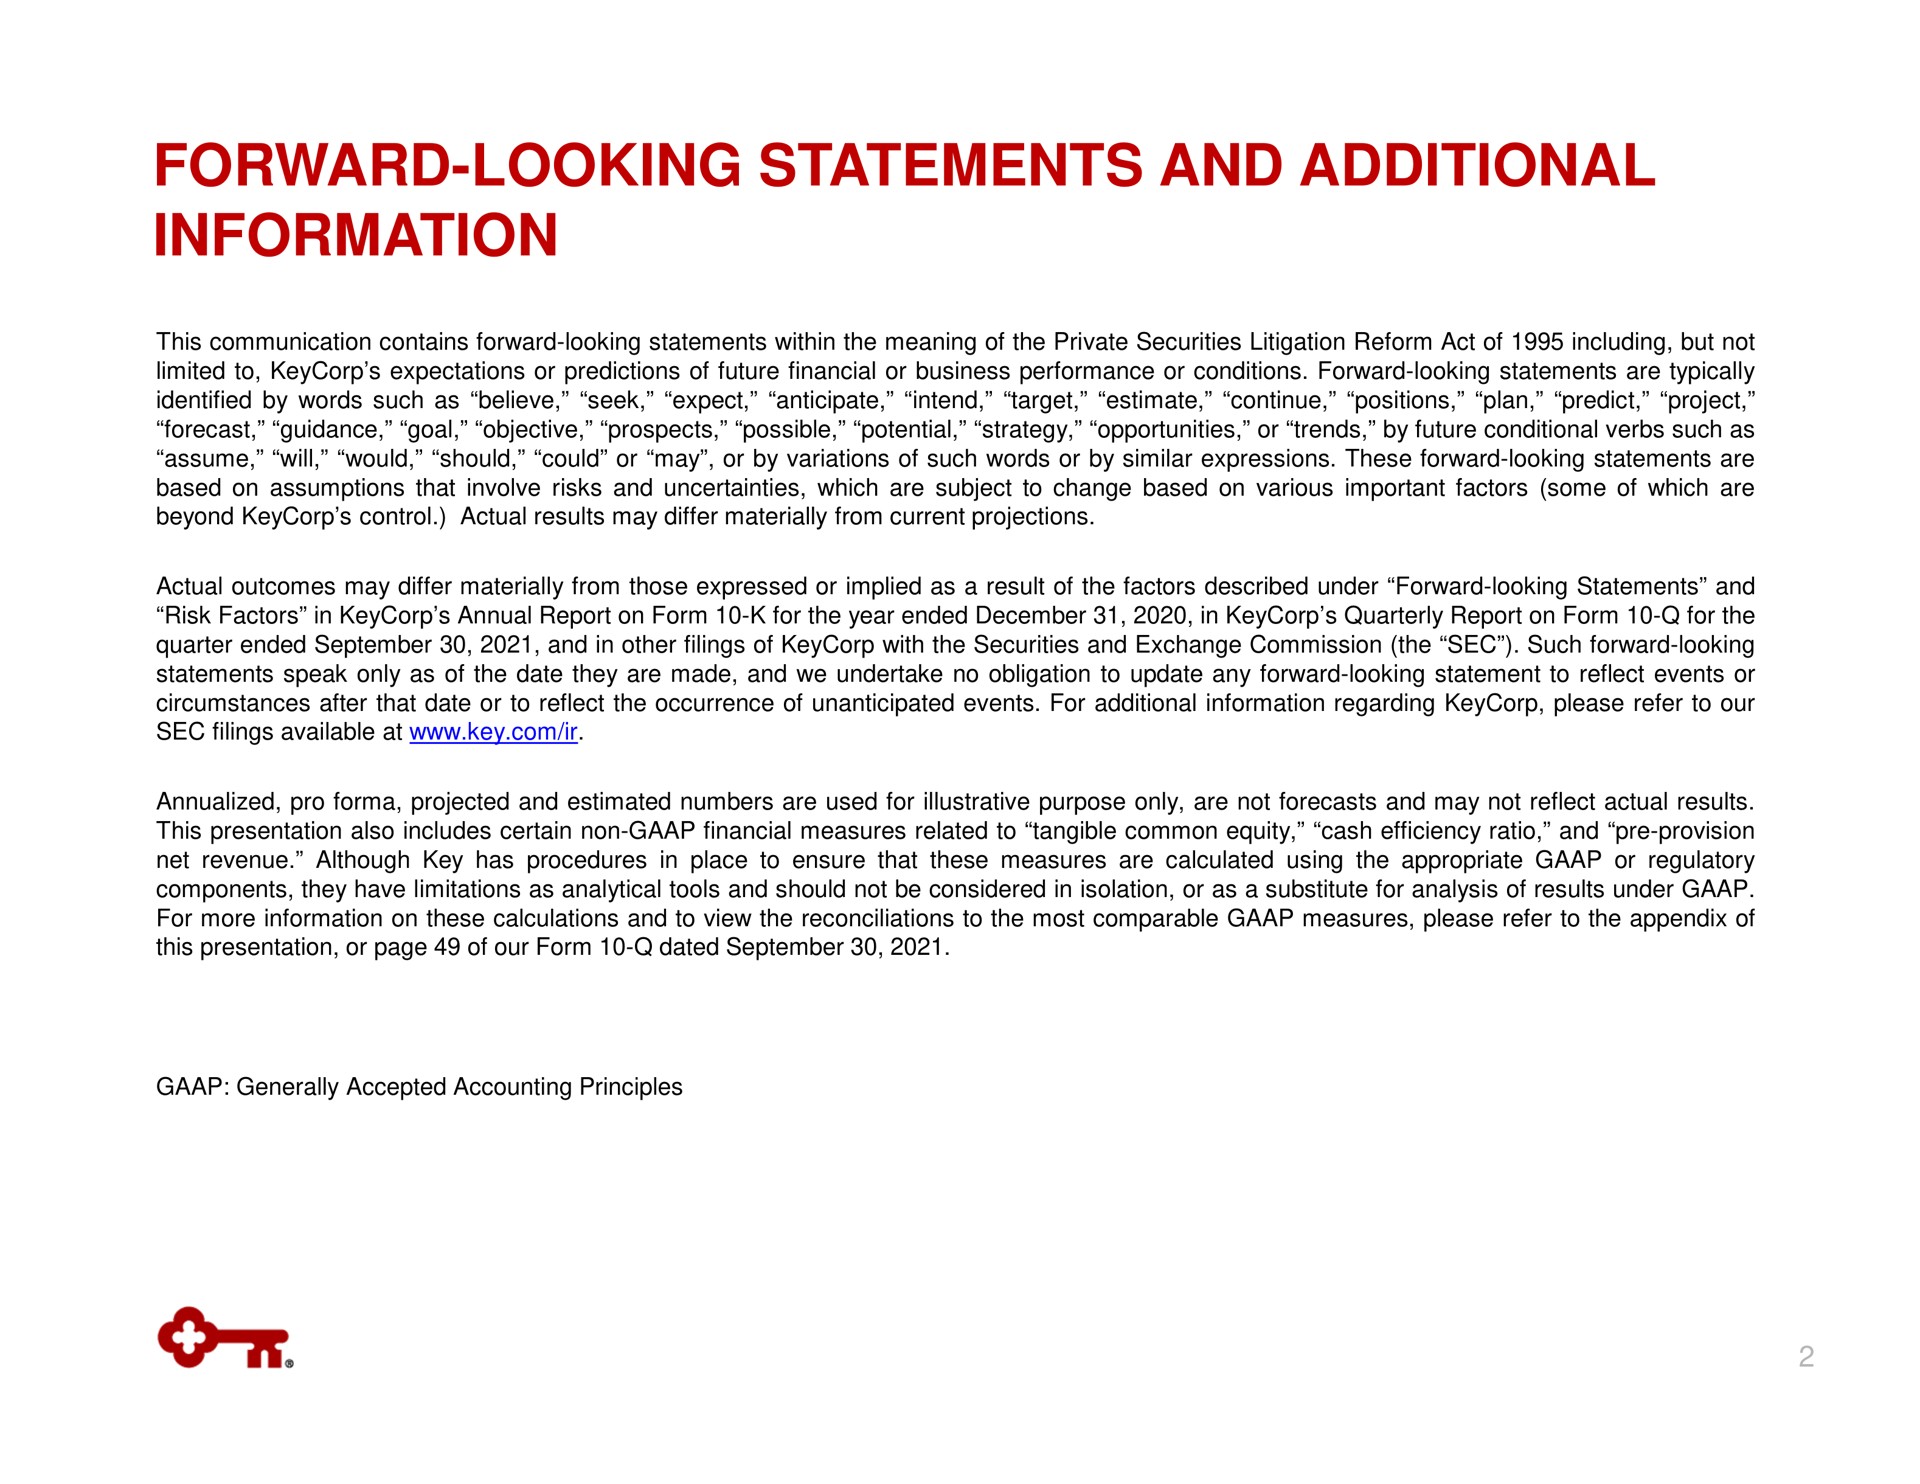 forward looking statements and additional information or | KeyCorp